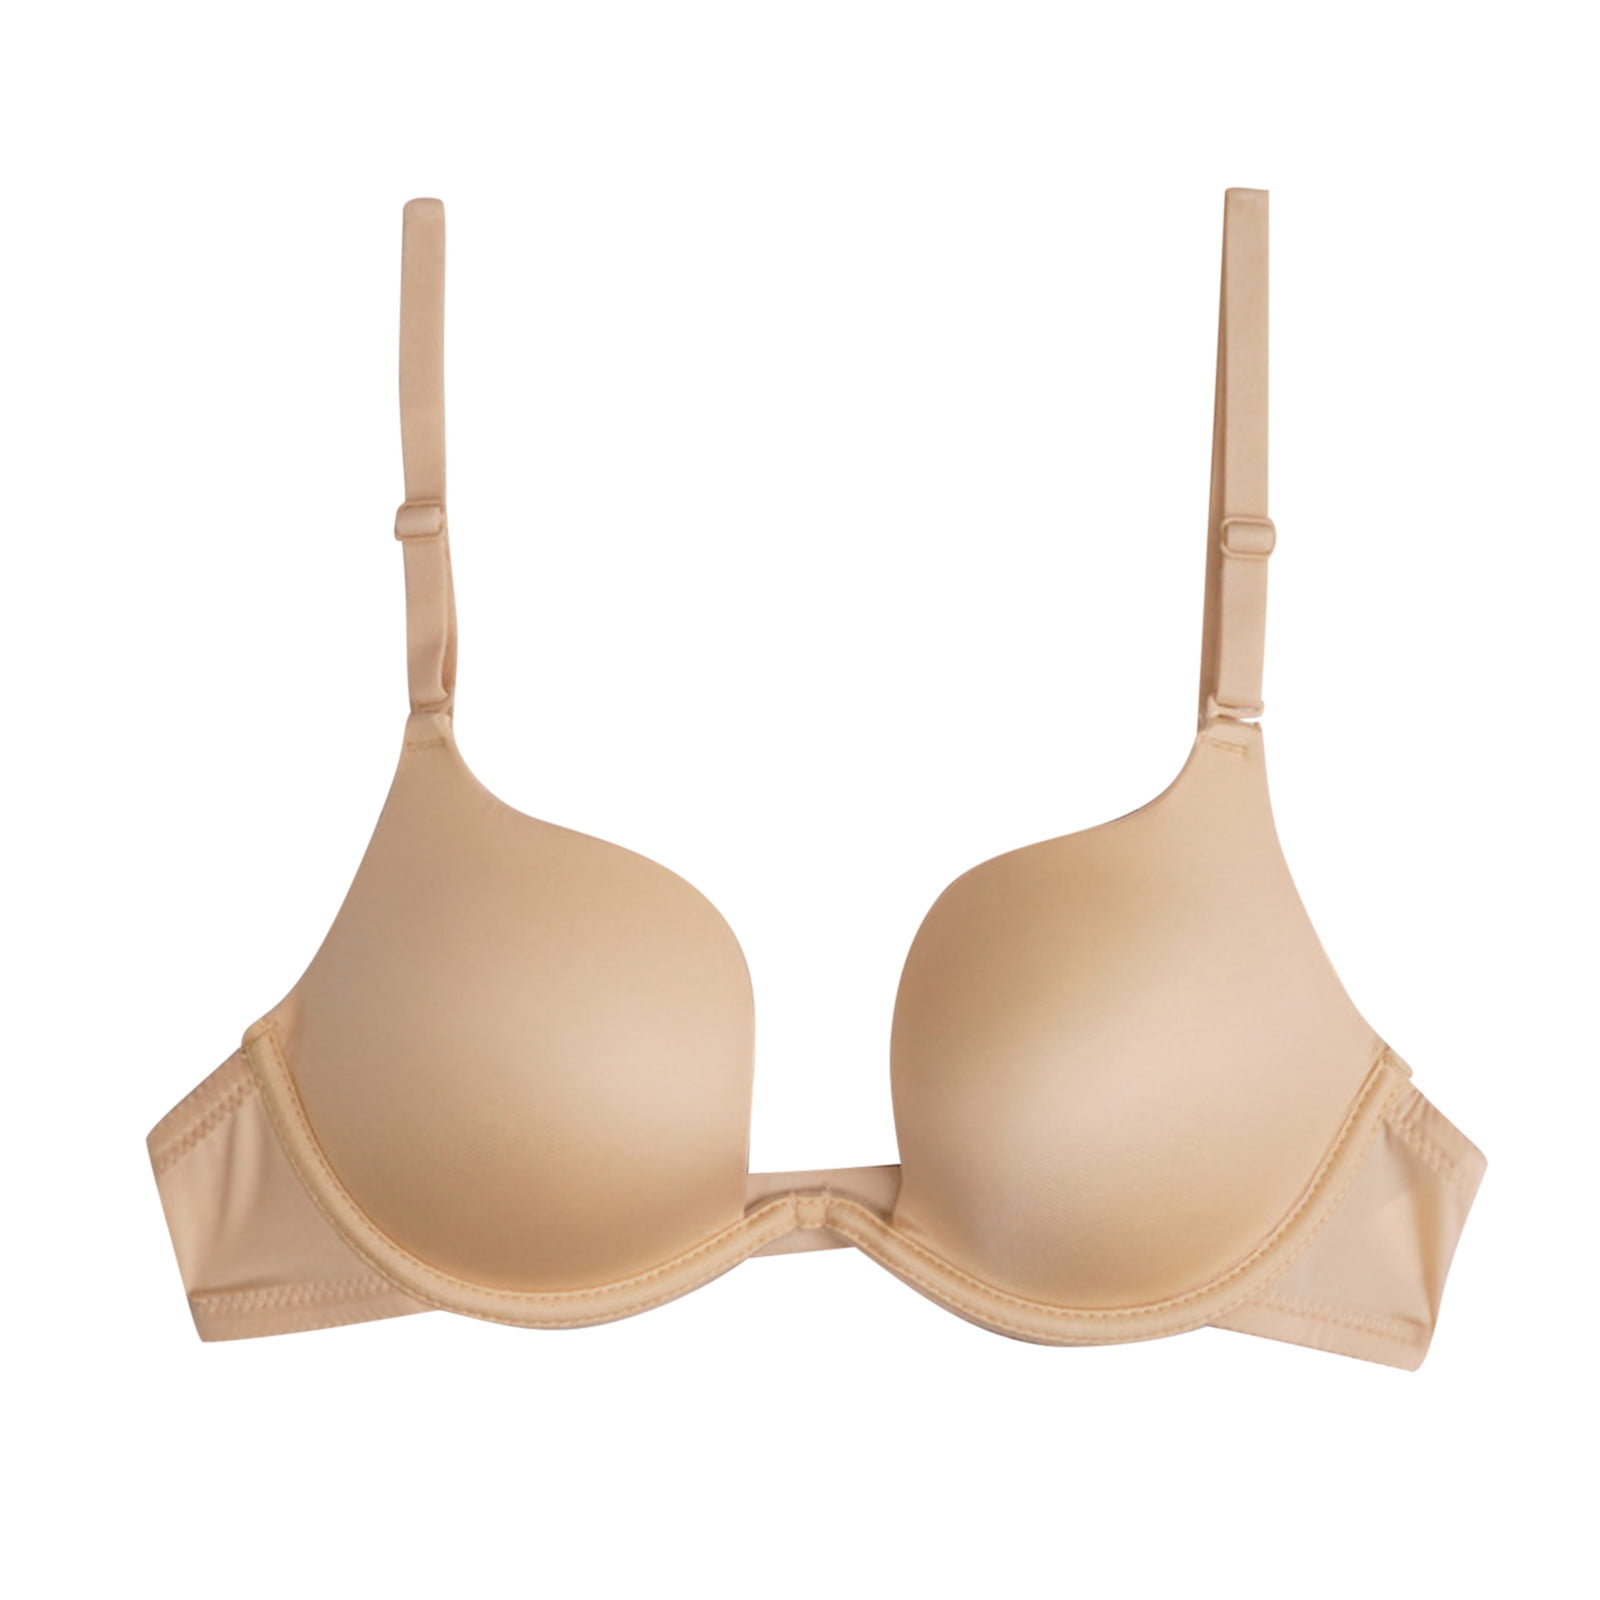 DEOTSY Sticy Bra Thin Seamless Lingerie Women's Small Chest